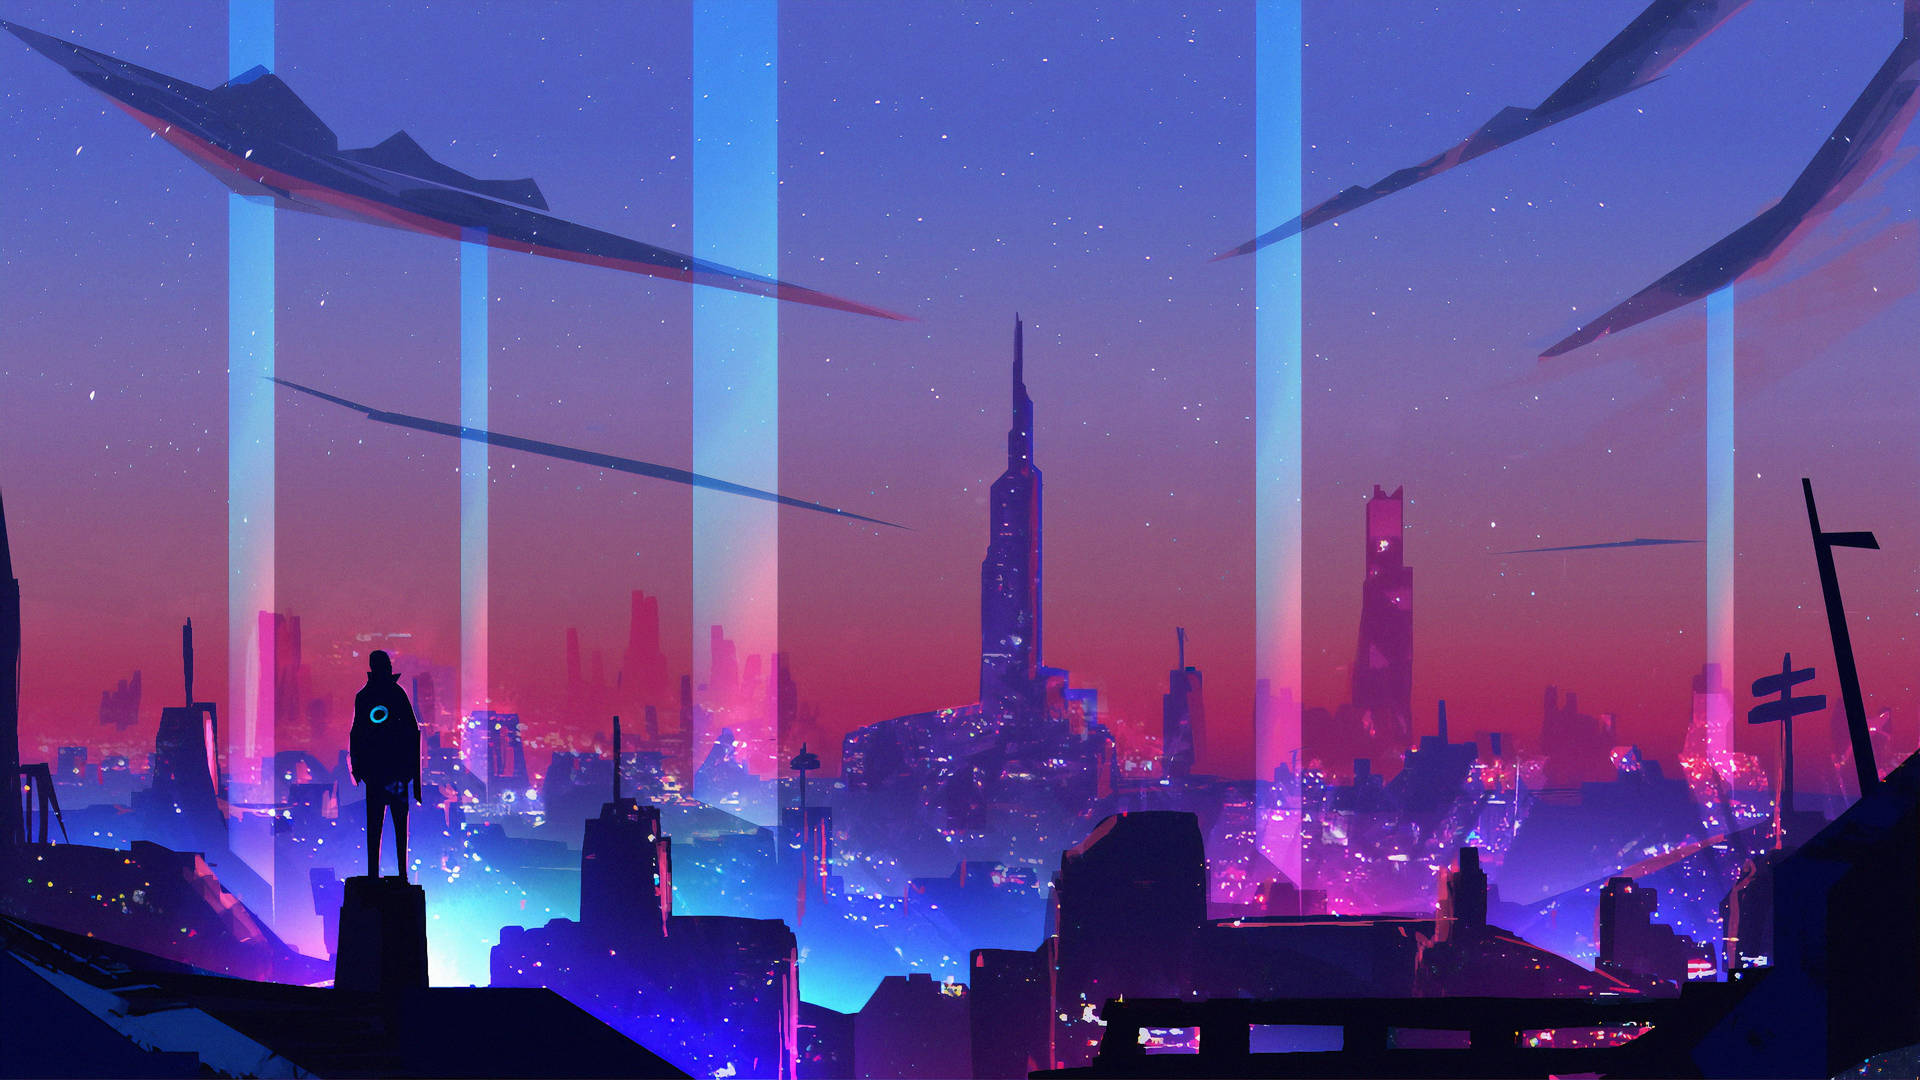 Man Looks Out Over Techno City Wallpaper